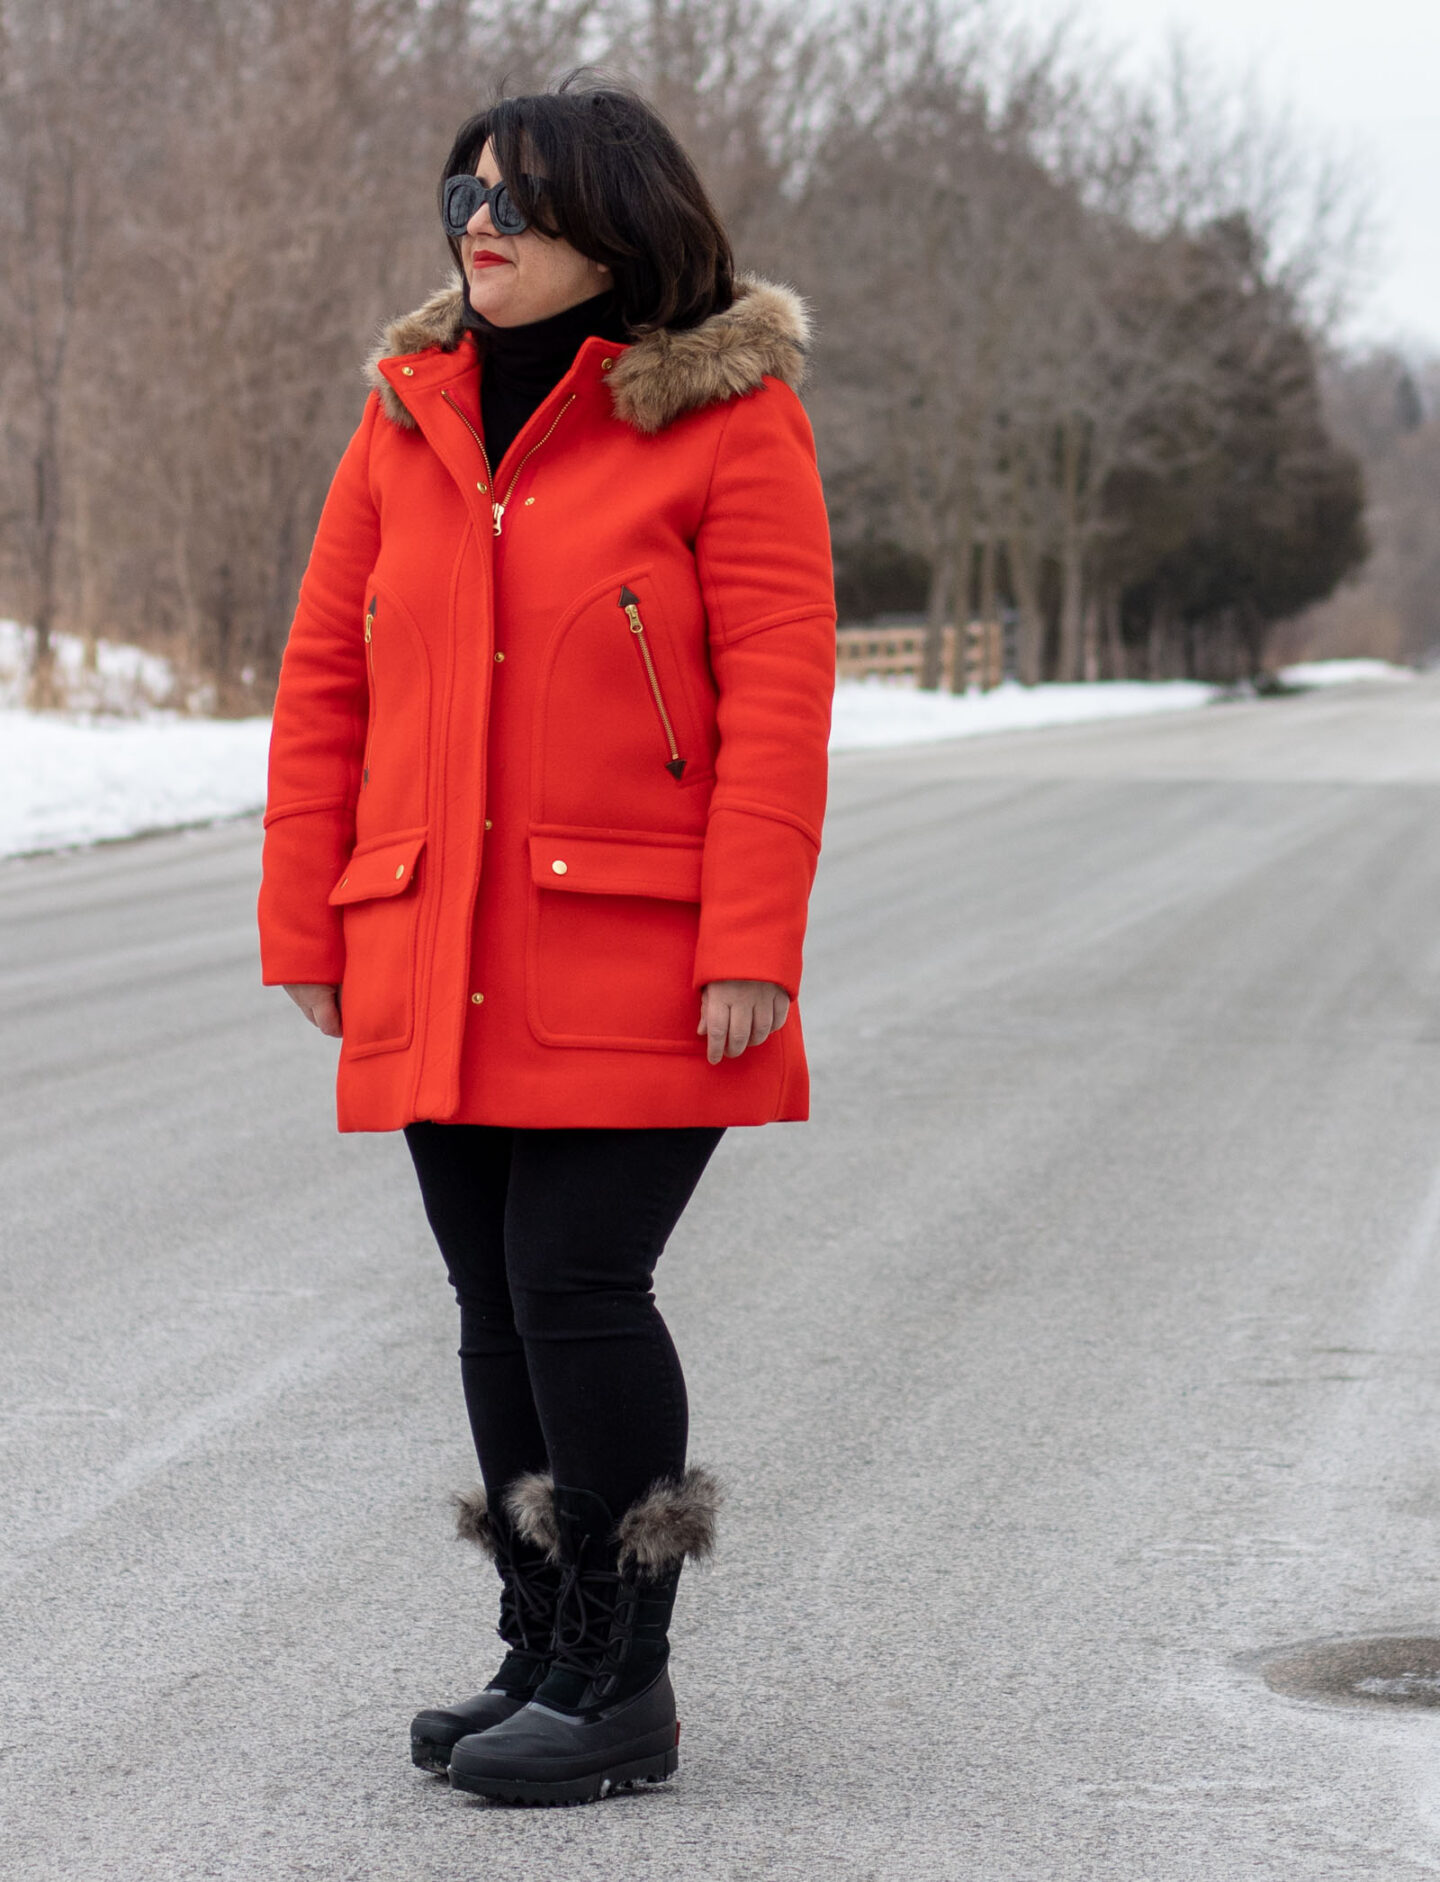 red and black outfit, jcrew chateau parka